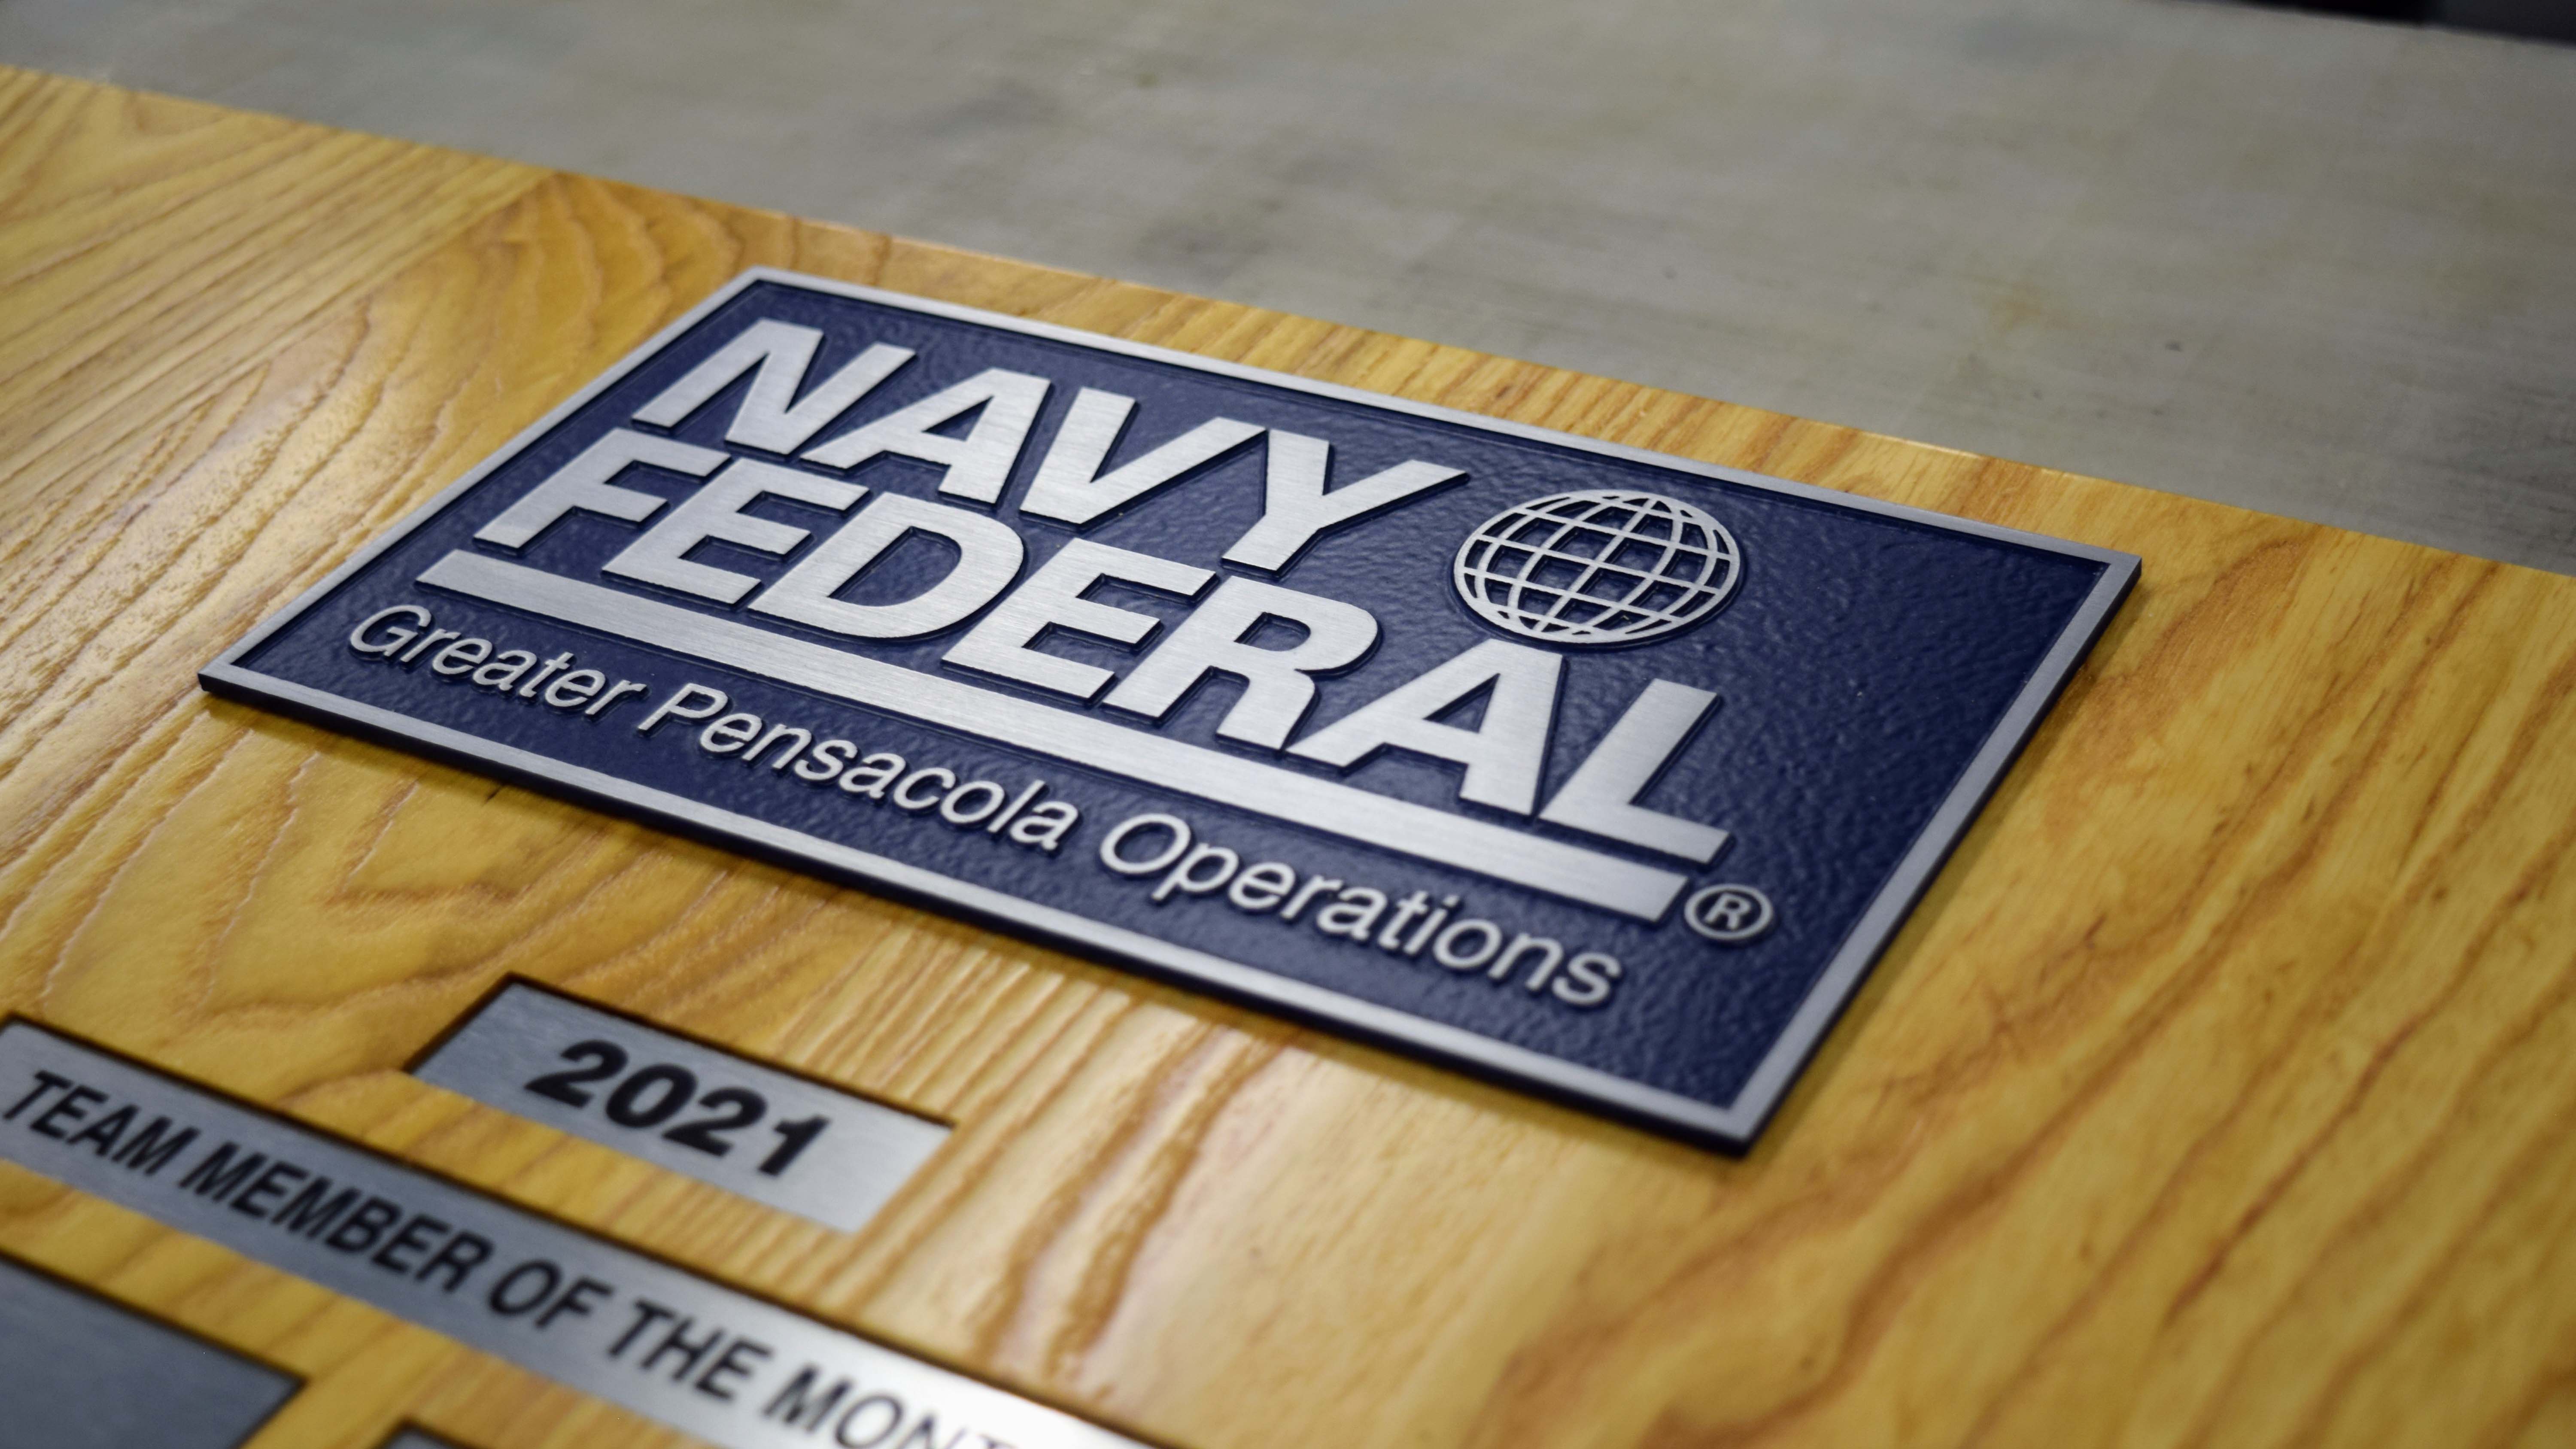 Employee recognition board for Navy Federal by signgeek 